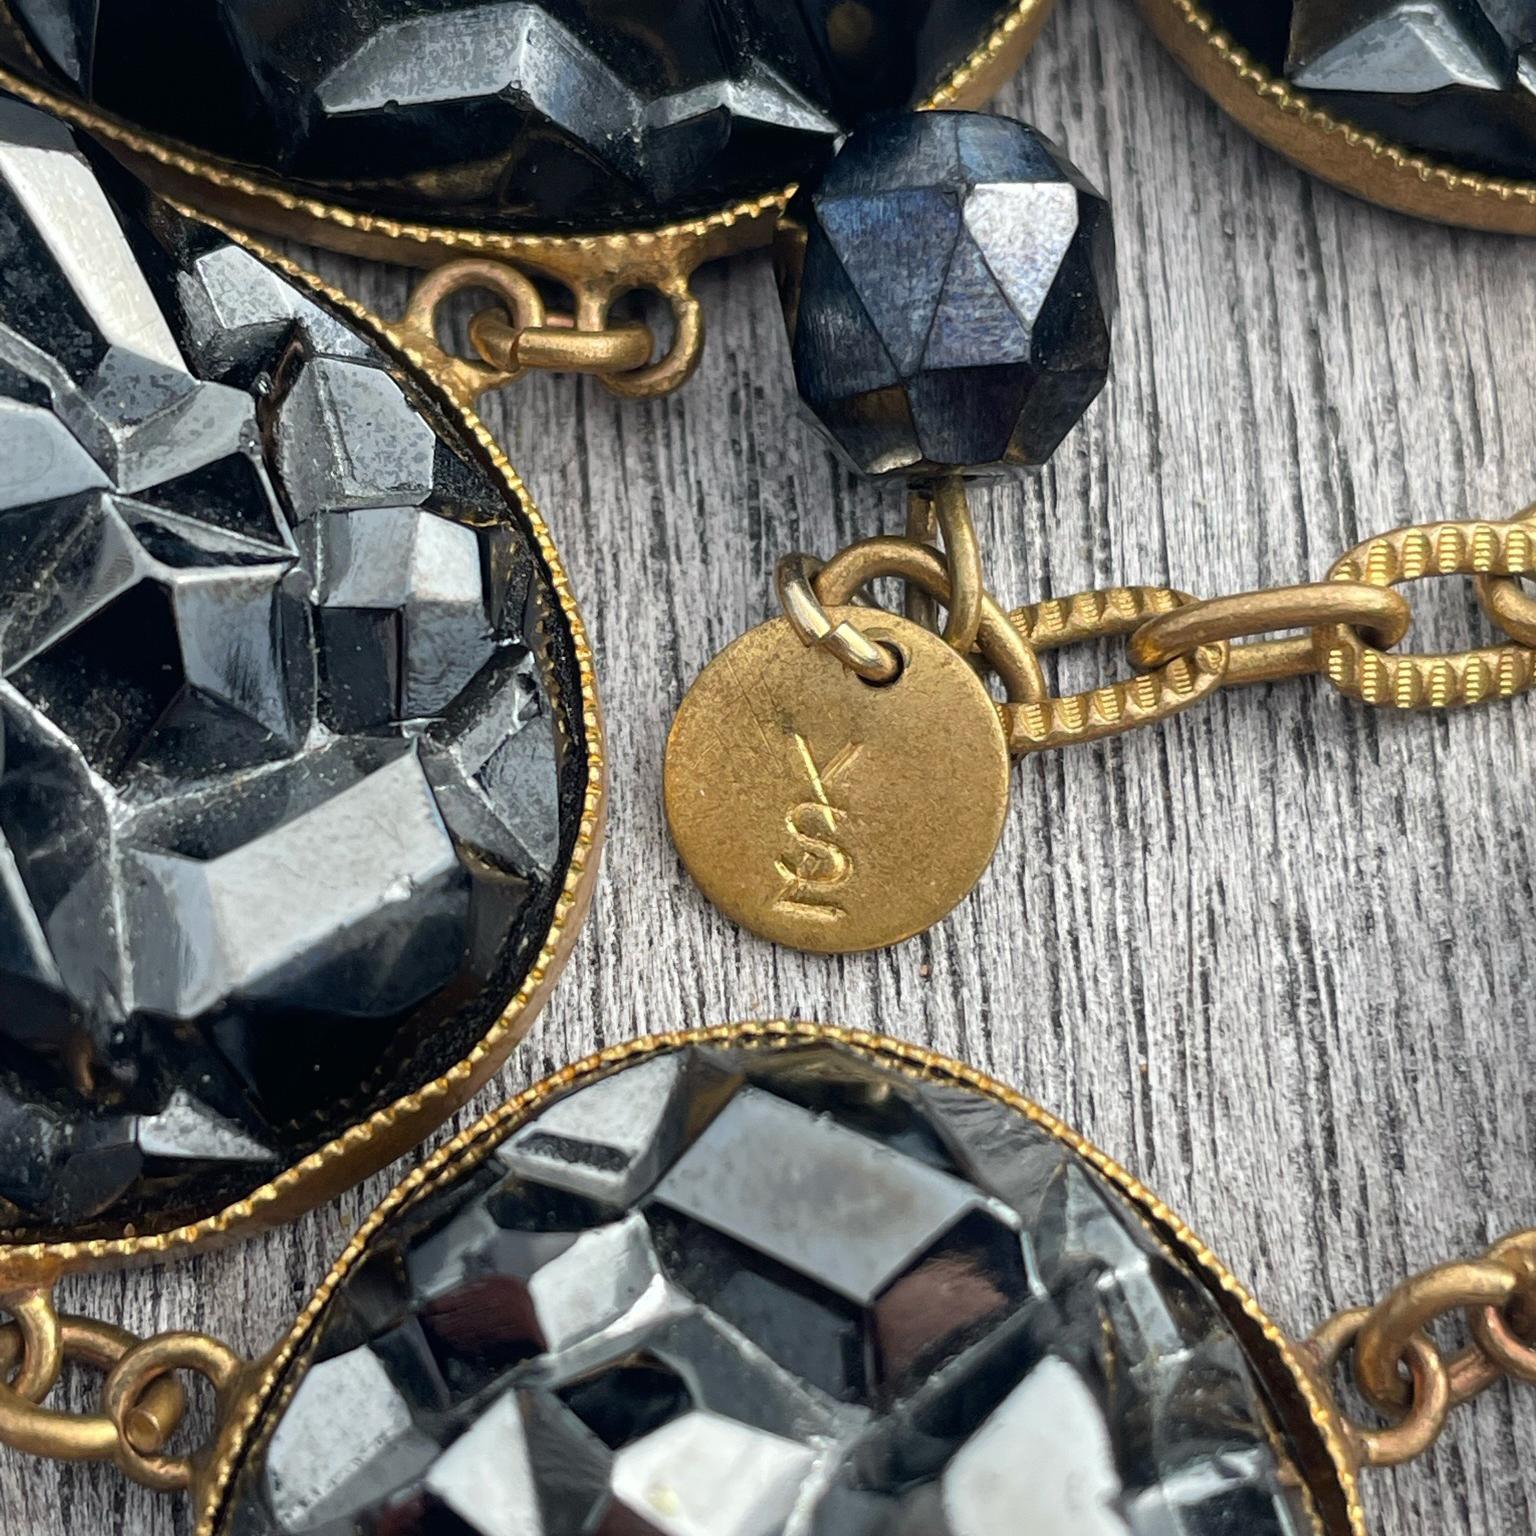 This is one of the most unique vintage Yves Saint Laurent vintage jewelry pieces we've come across! This 1980's limited edition necklace looks like chunky pieces of broken dark gunmetal grey geodes on gold plated ovals. We have seen similar style